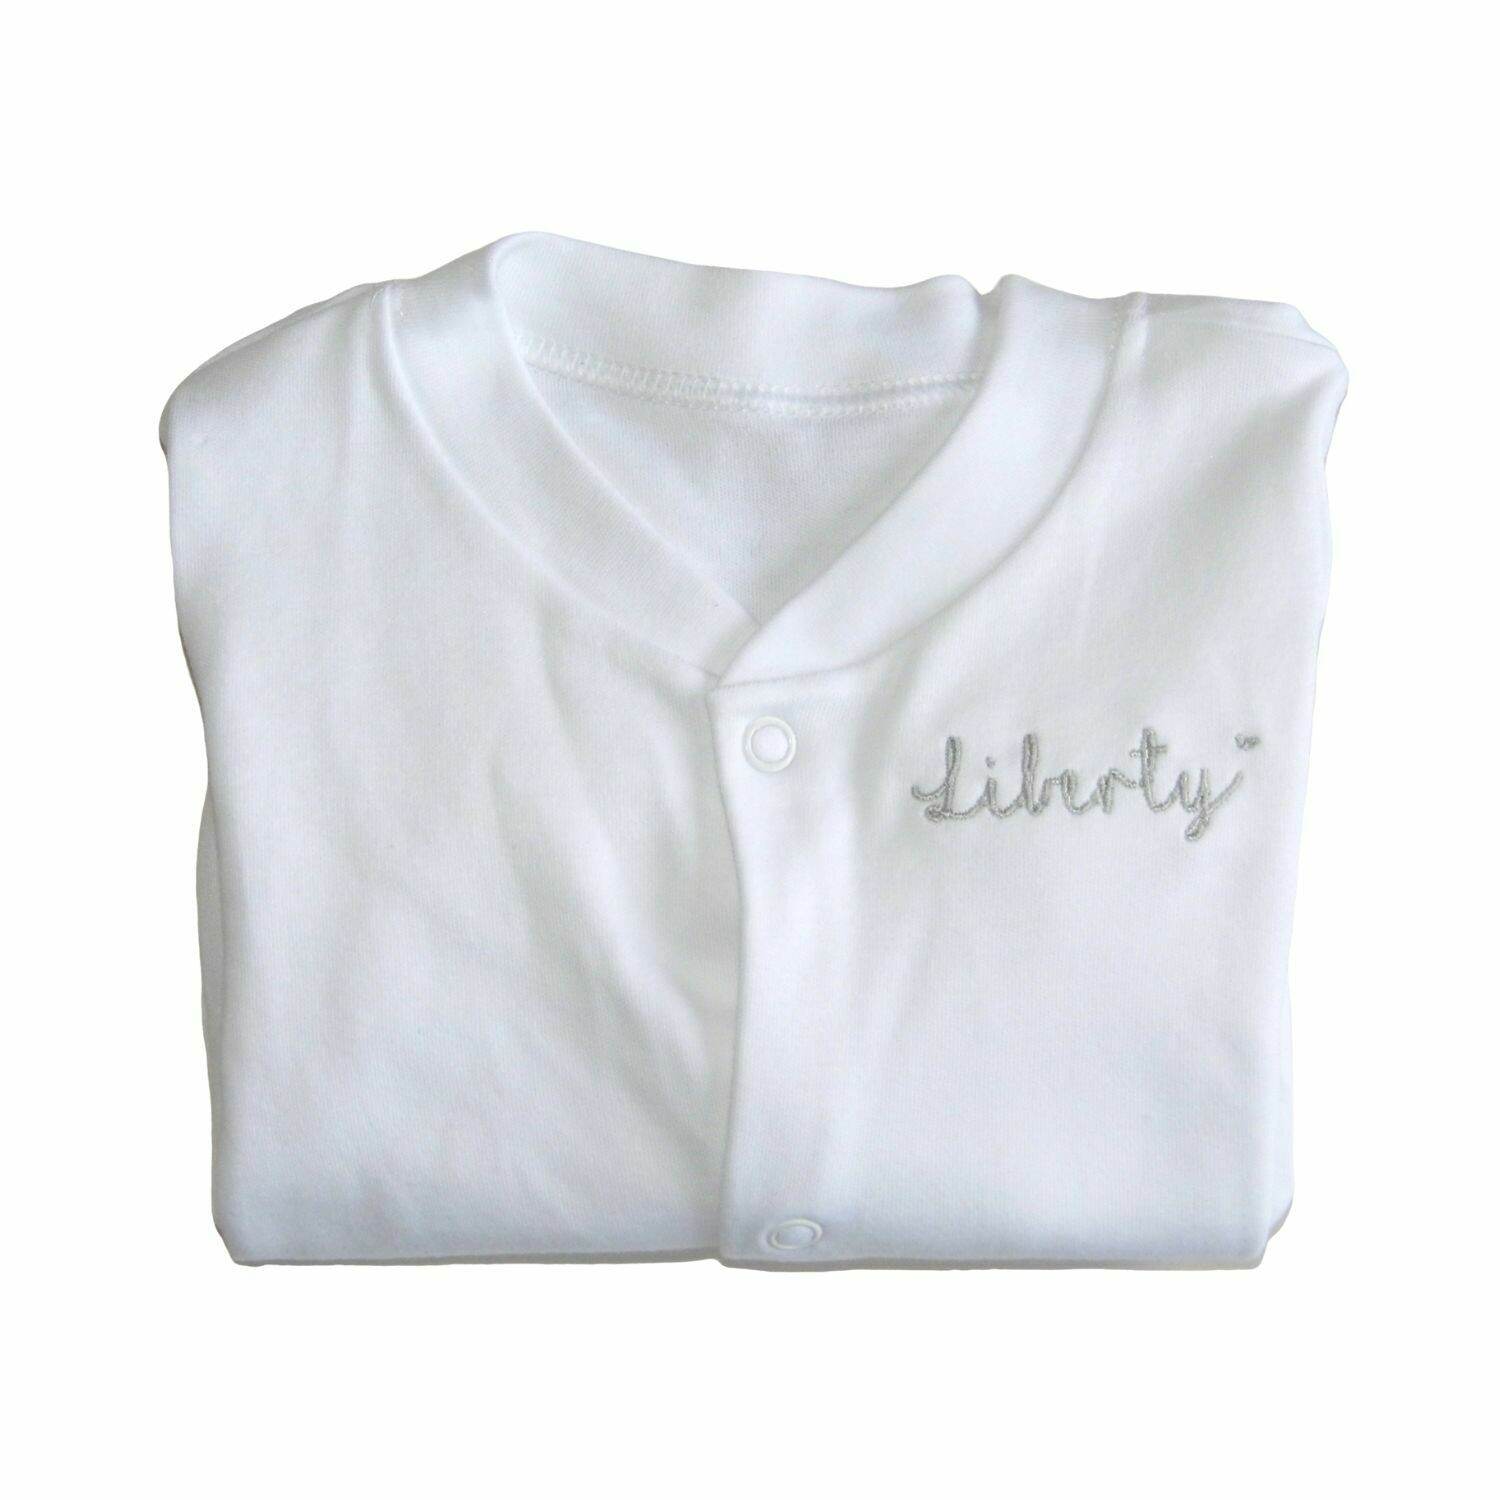 Personalised embroidered baby sleep suit